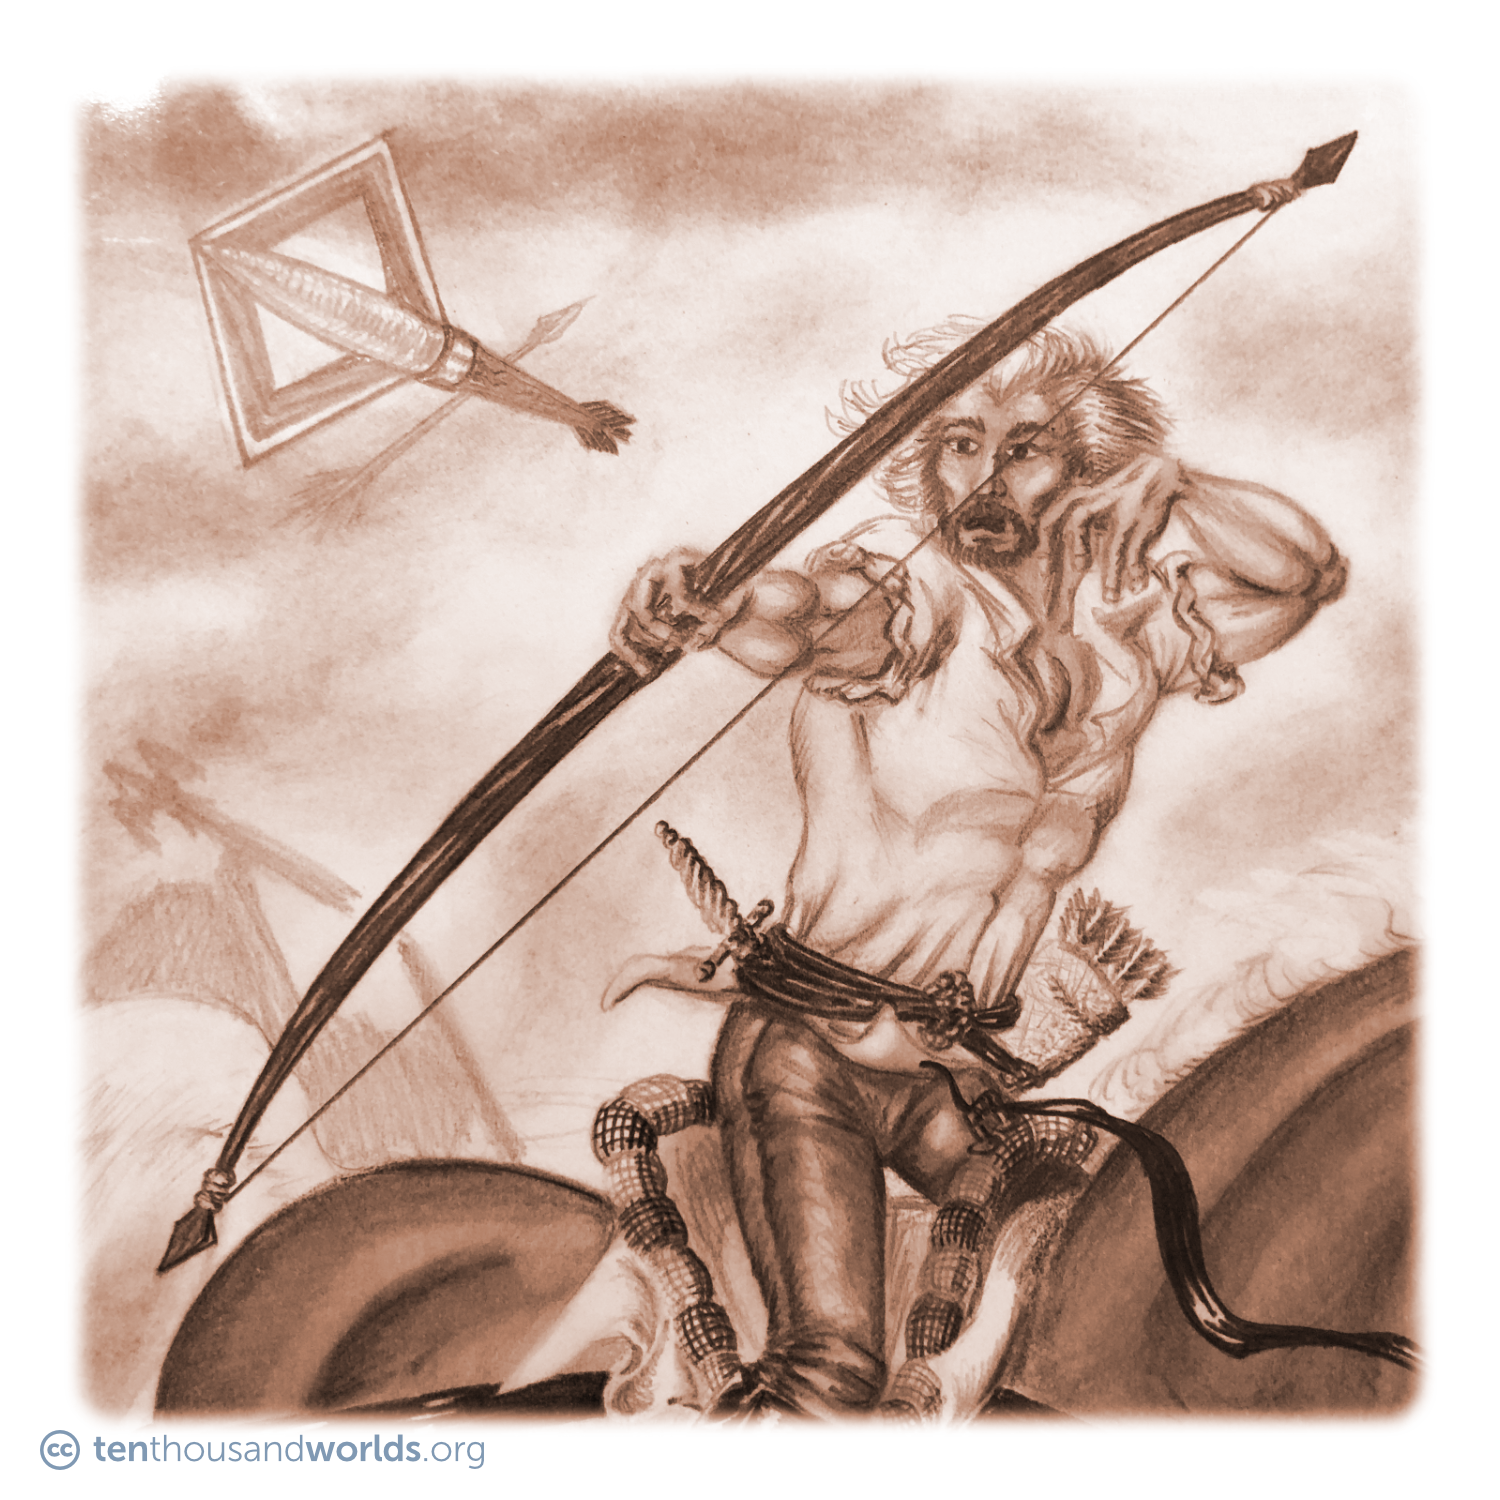 A pencil illustration of a man firing an arrow from a bow while riding a horse, with signs of a battle in the fog behind him.